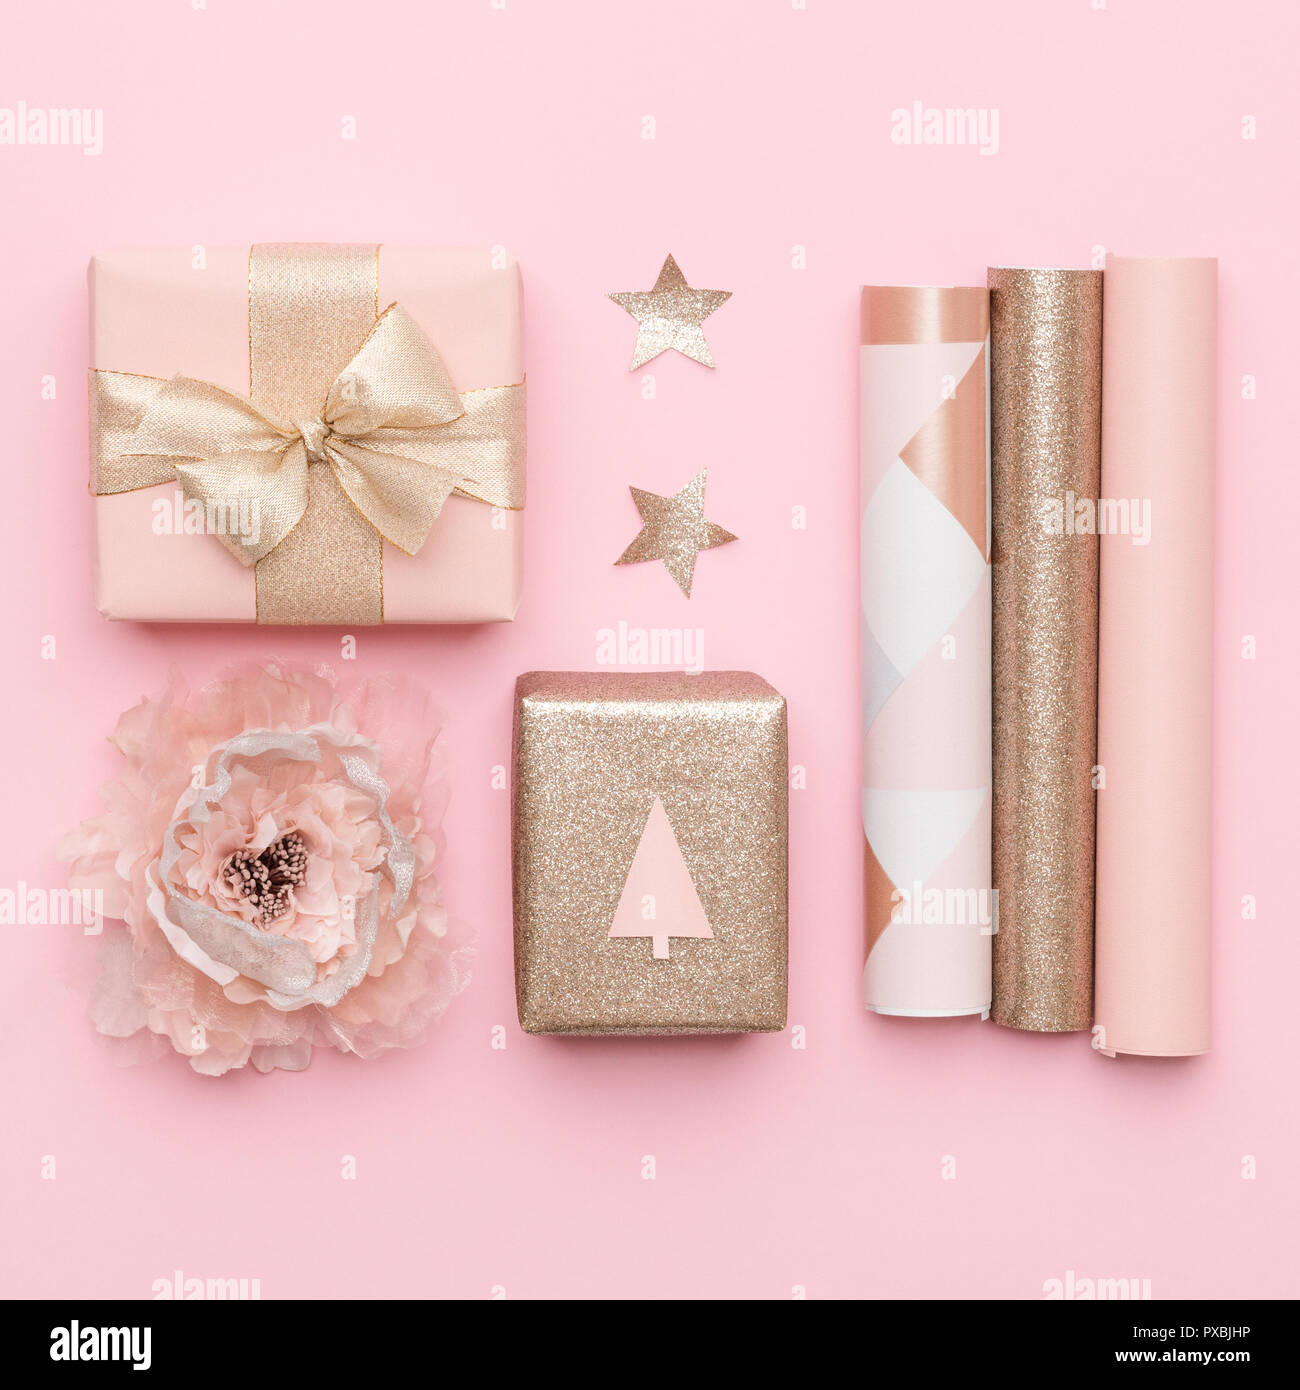 Gift wrapping. Pink and gold nordic christmas gifts isolated on pastel pink background. Wrapped xmas boxes. Stock Photo